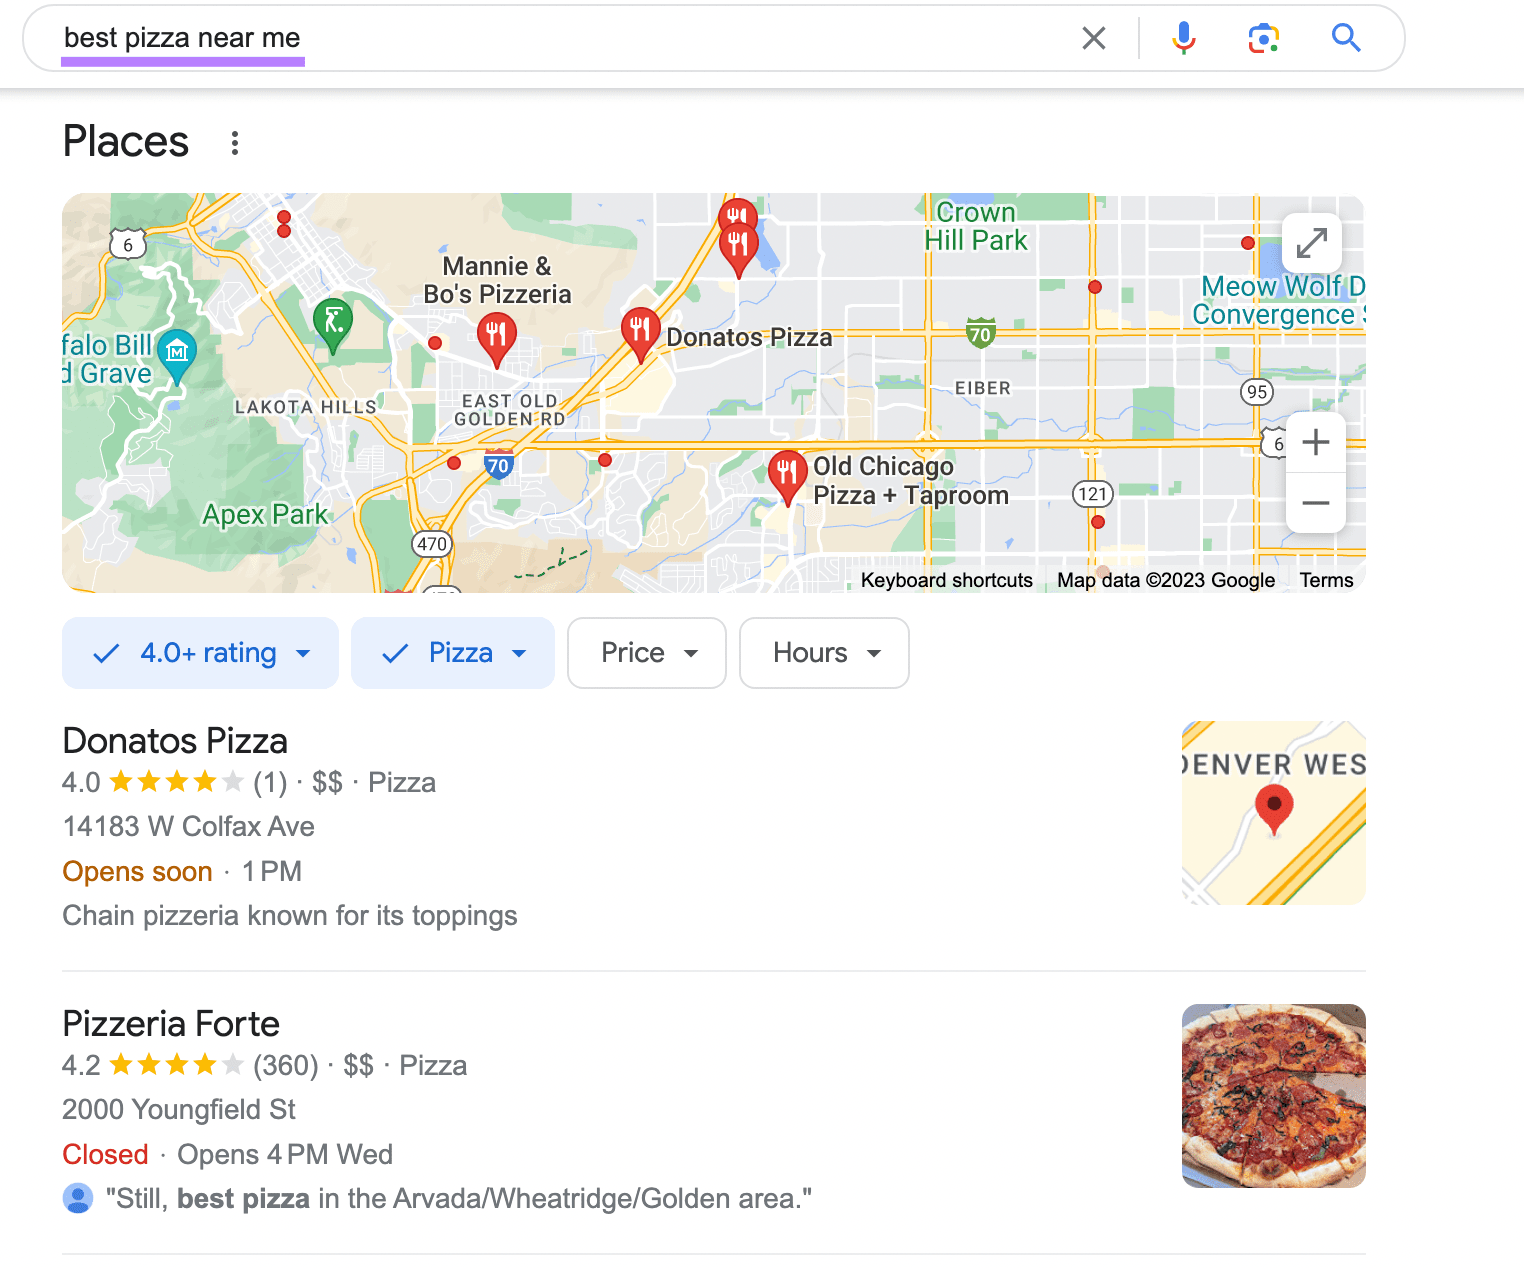 Google's local search results for "best pizza near me"